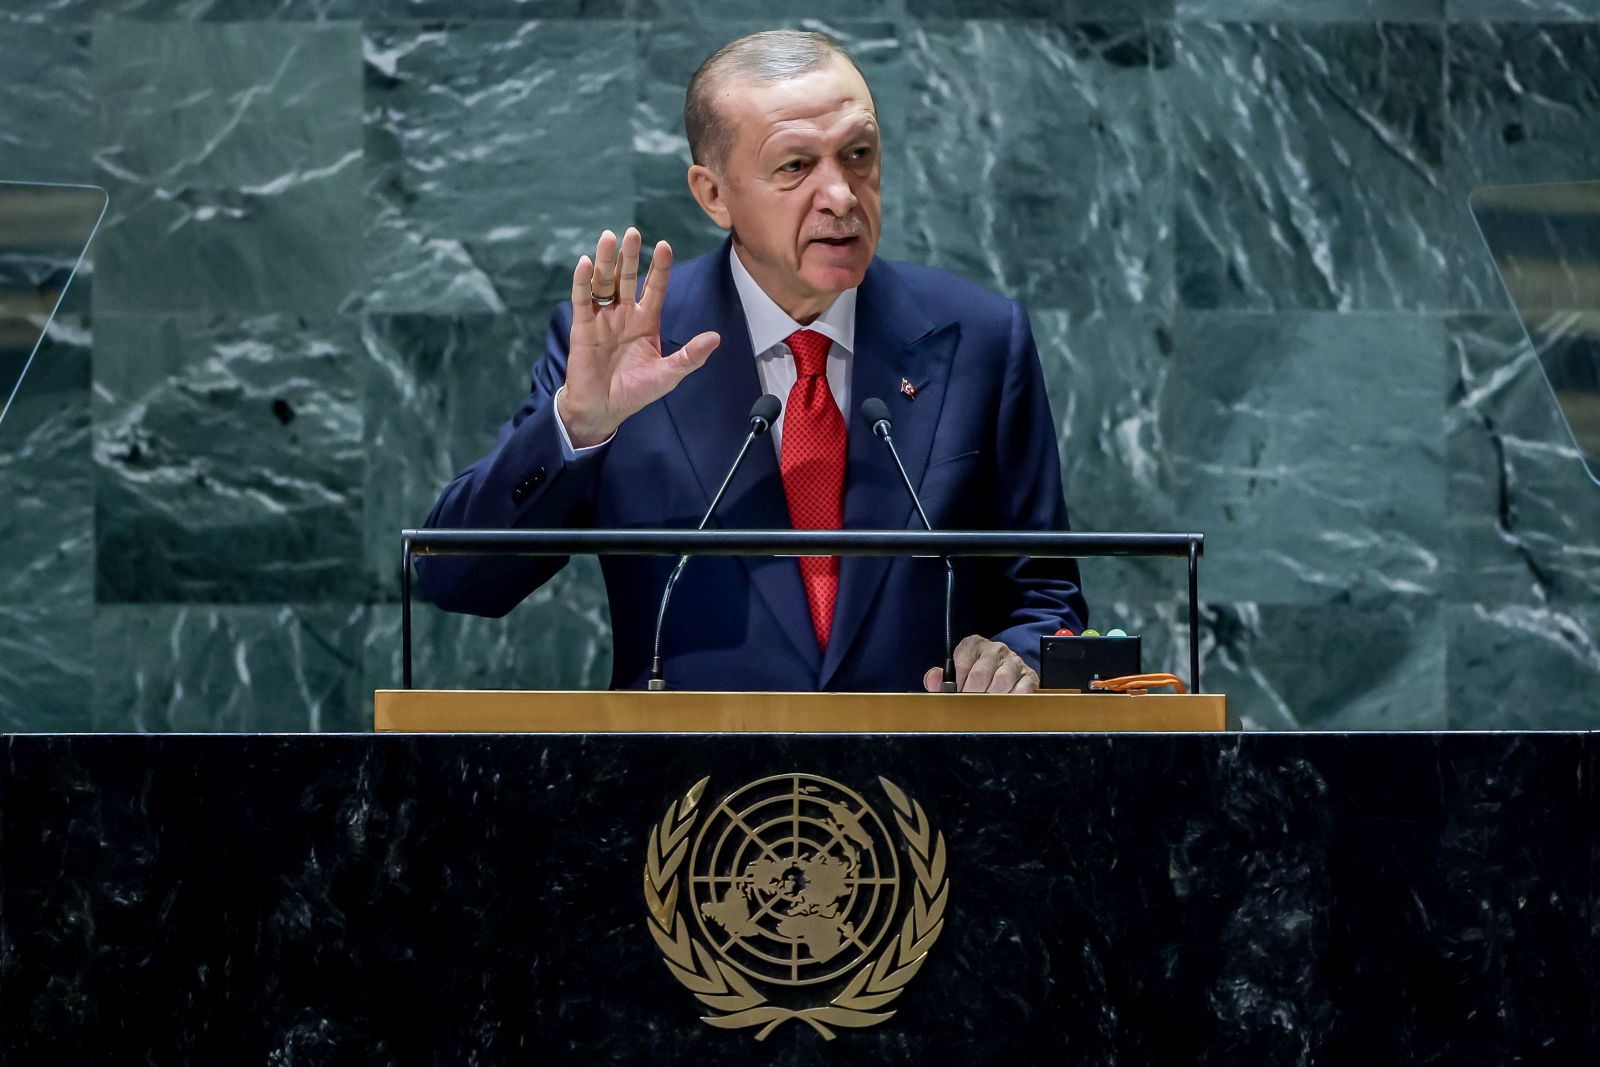 epa10869833 President of Turkey Recep Tayyip Erdogan addresses the delegates during the 78th session of the United Nations General Assembly at the United Nations Headquarters in New York, New York, USA, 19 September 2023.  EPA/JUSTIN LANE